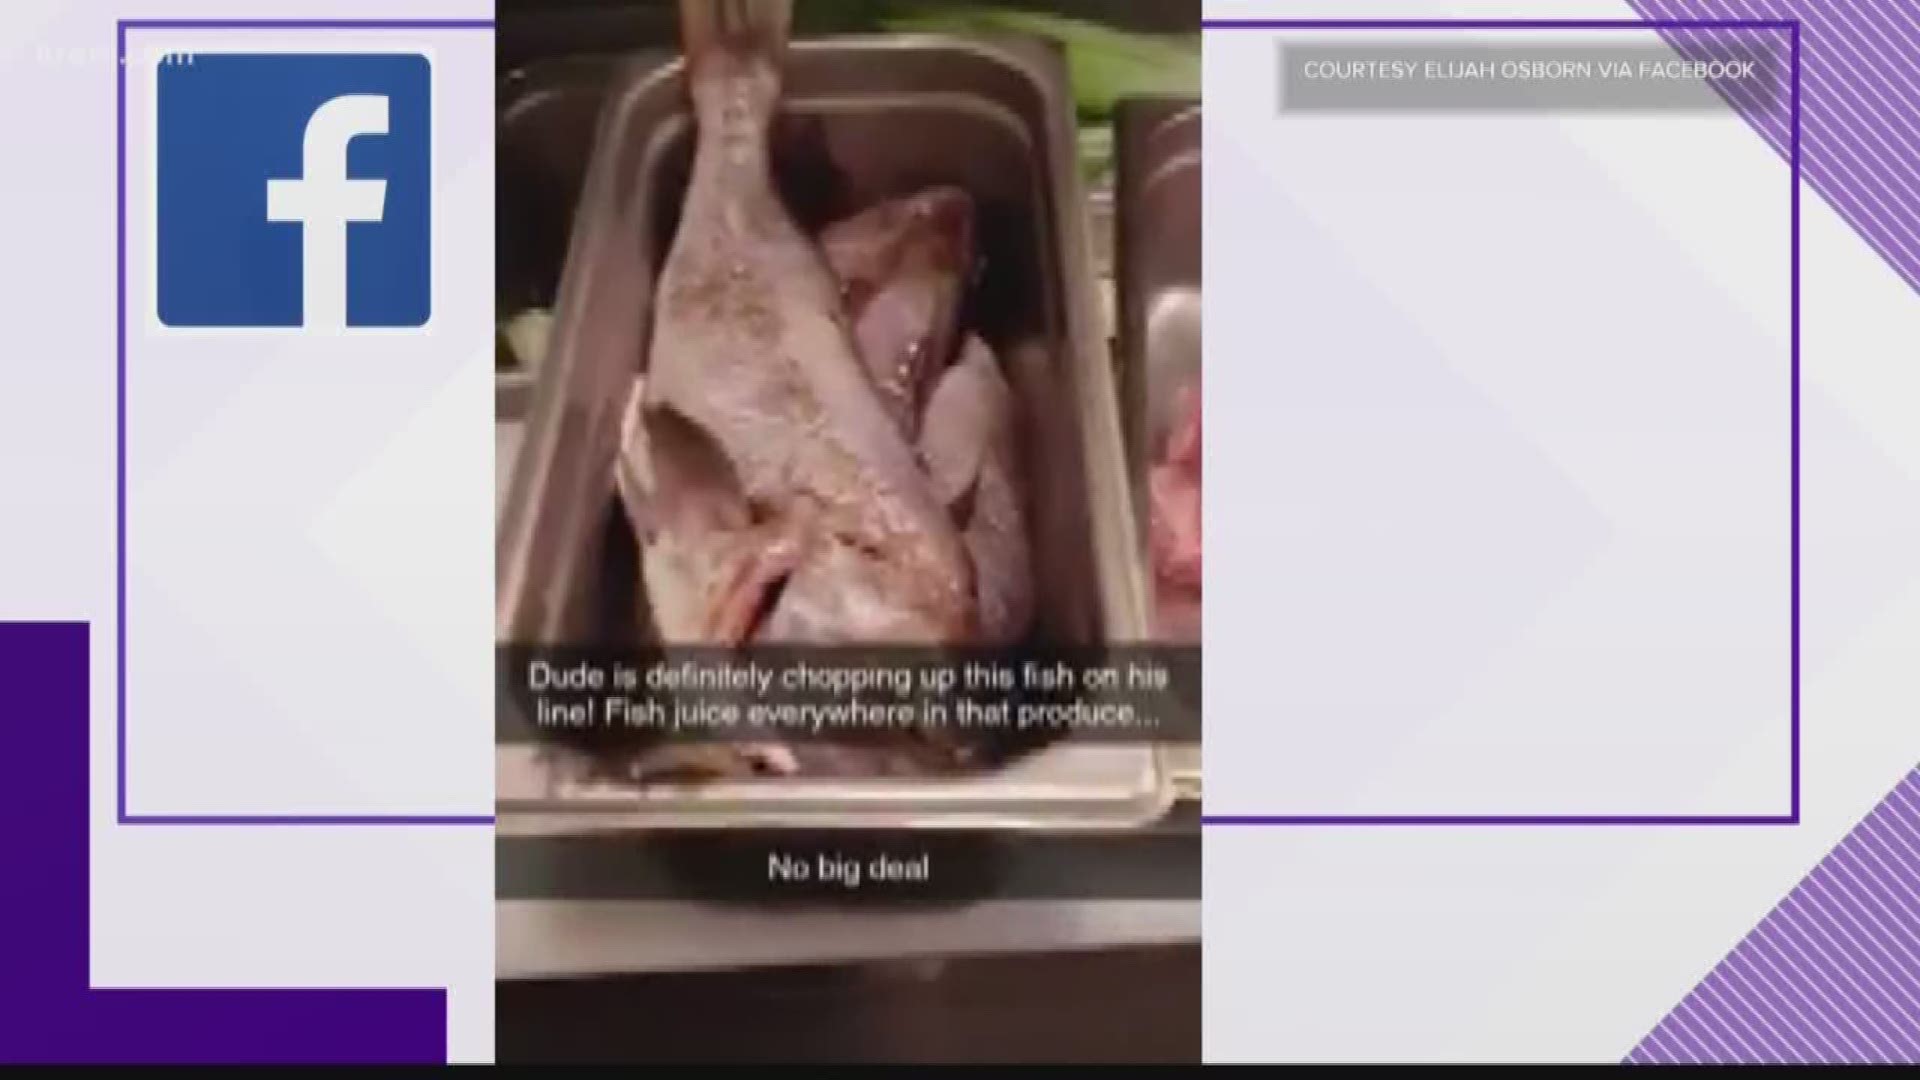 The video, allegedly shot from inside QQ Sushi, shows someone preparing food in a large mixing bowl on the floor, then storing it under a shelf.